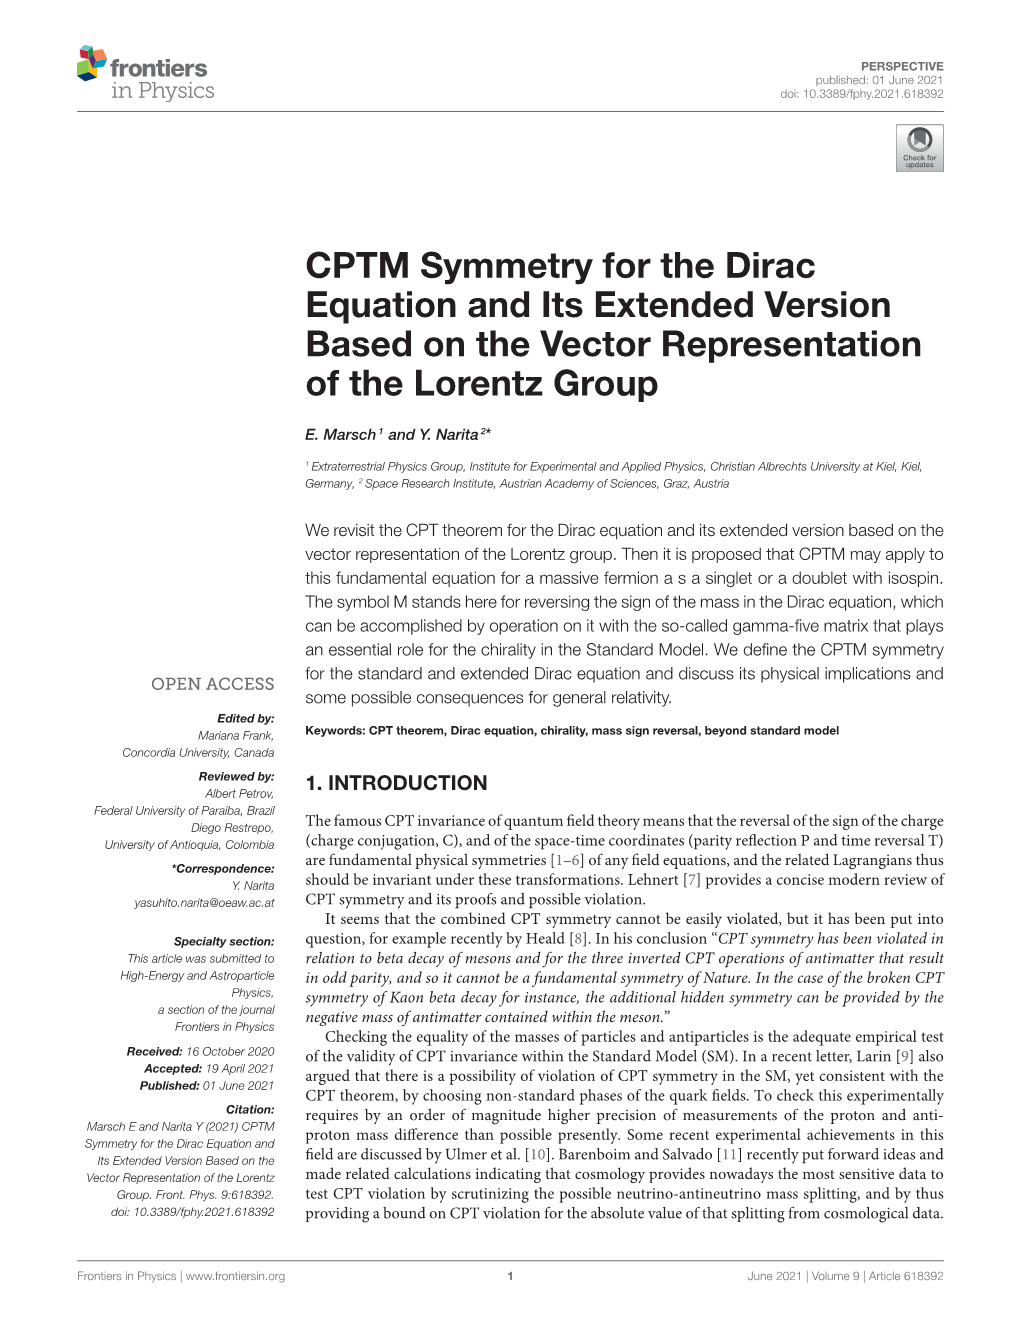 CPTM Symmetry for the Dirac Equation and Its Extended Version Based on the Vector Representation of the Lorentz Group